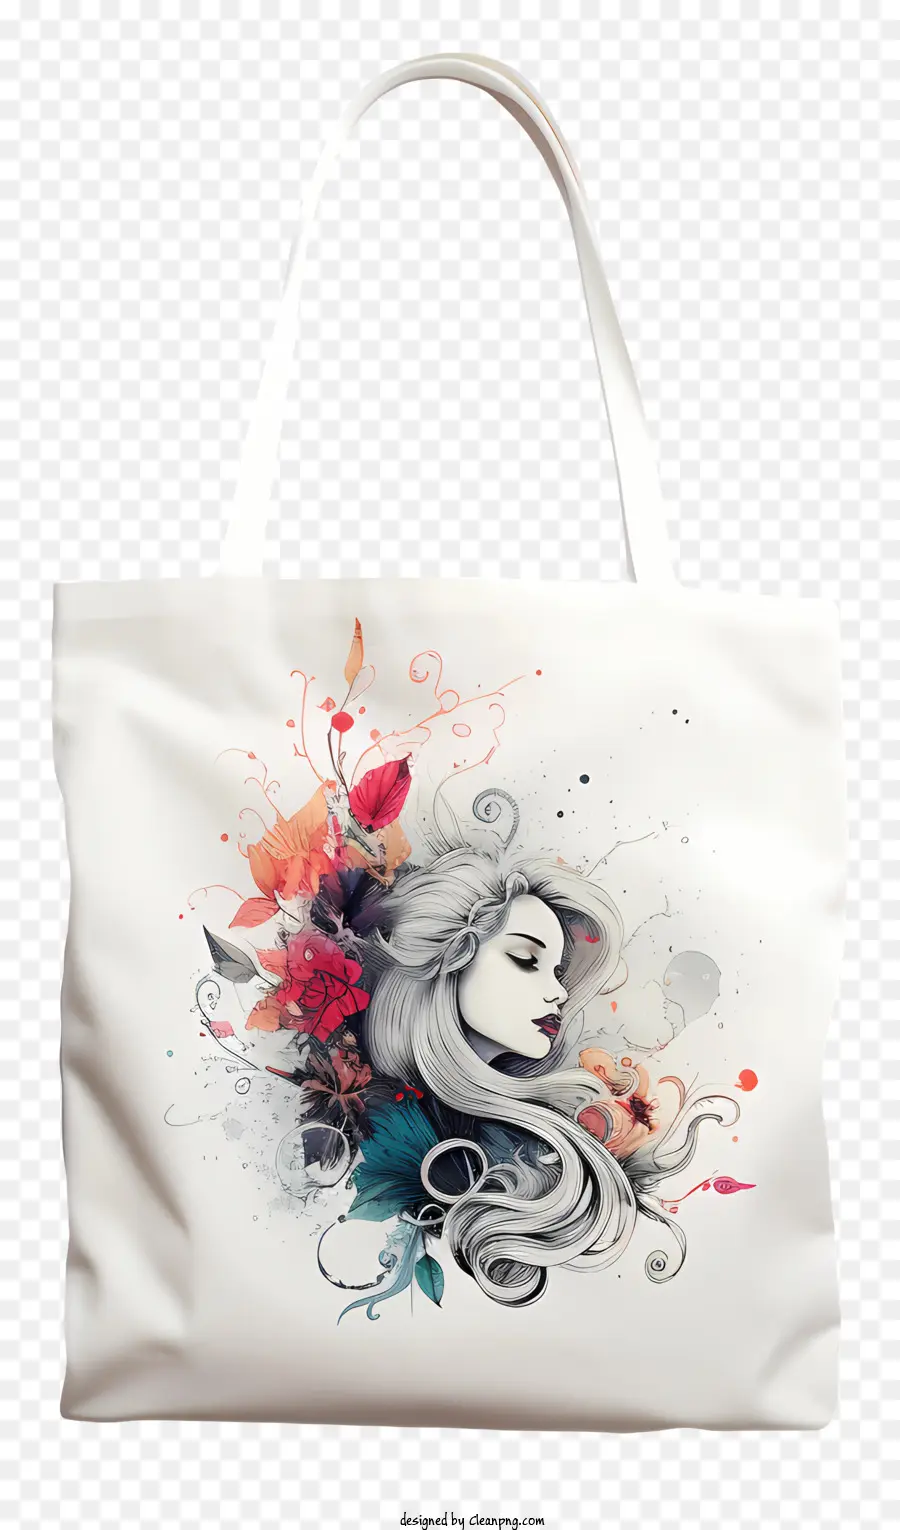 tote bag woman's face painted flower serene expression vibrant colors